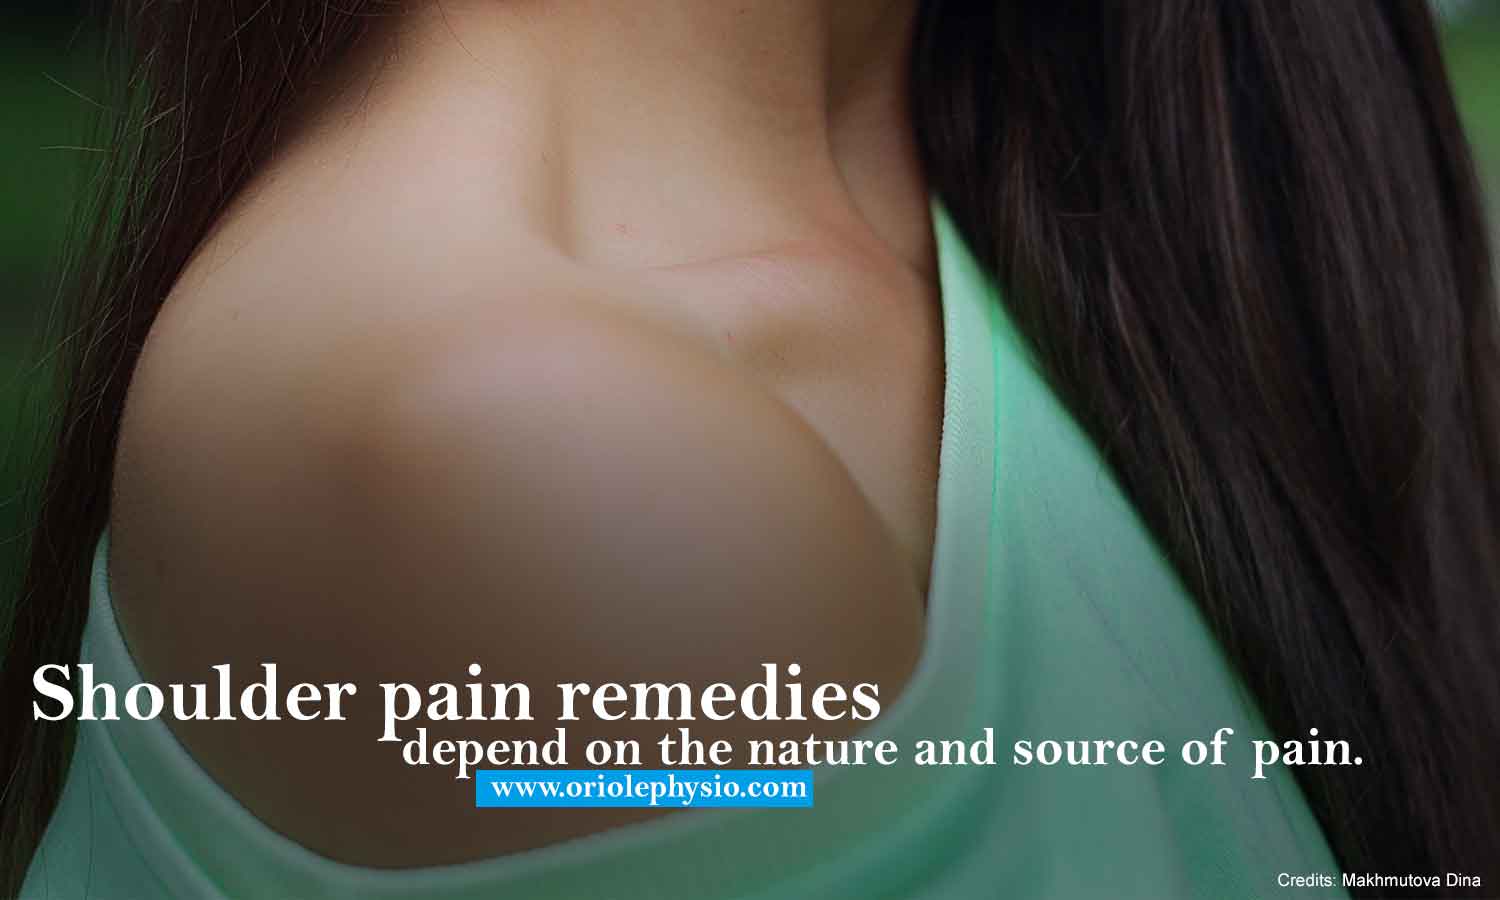 Shoulder pain remedies depend on the nature and source of pain.